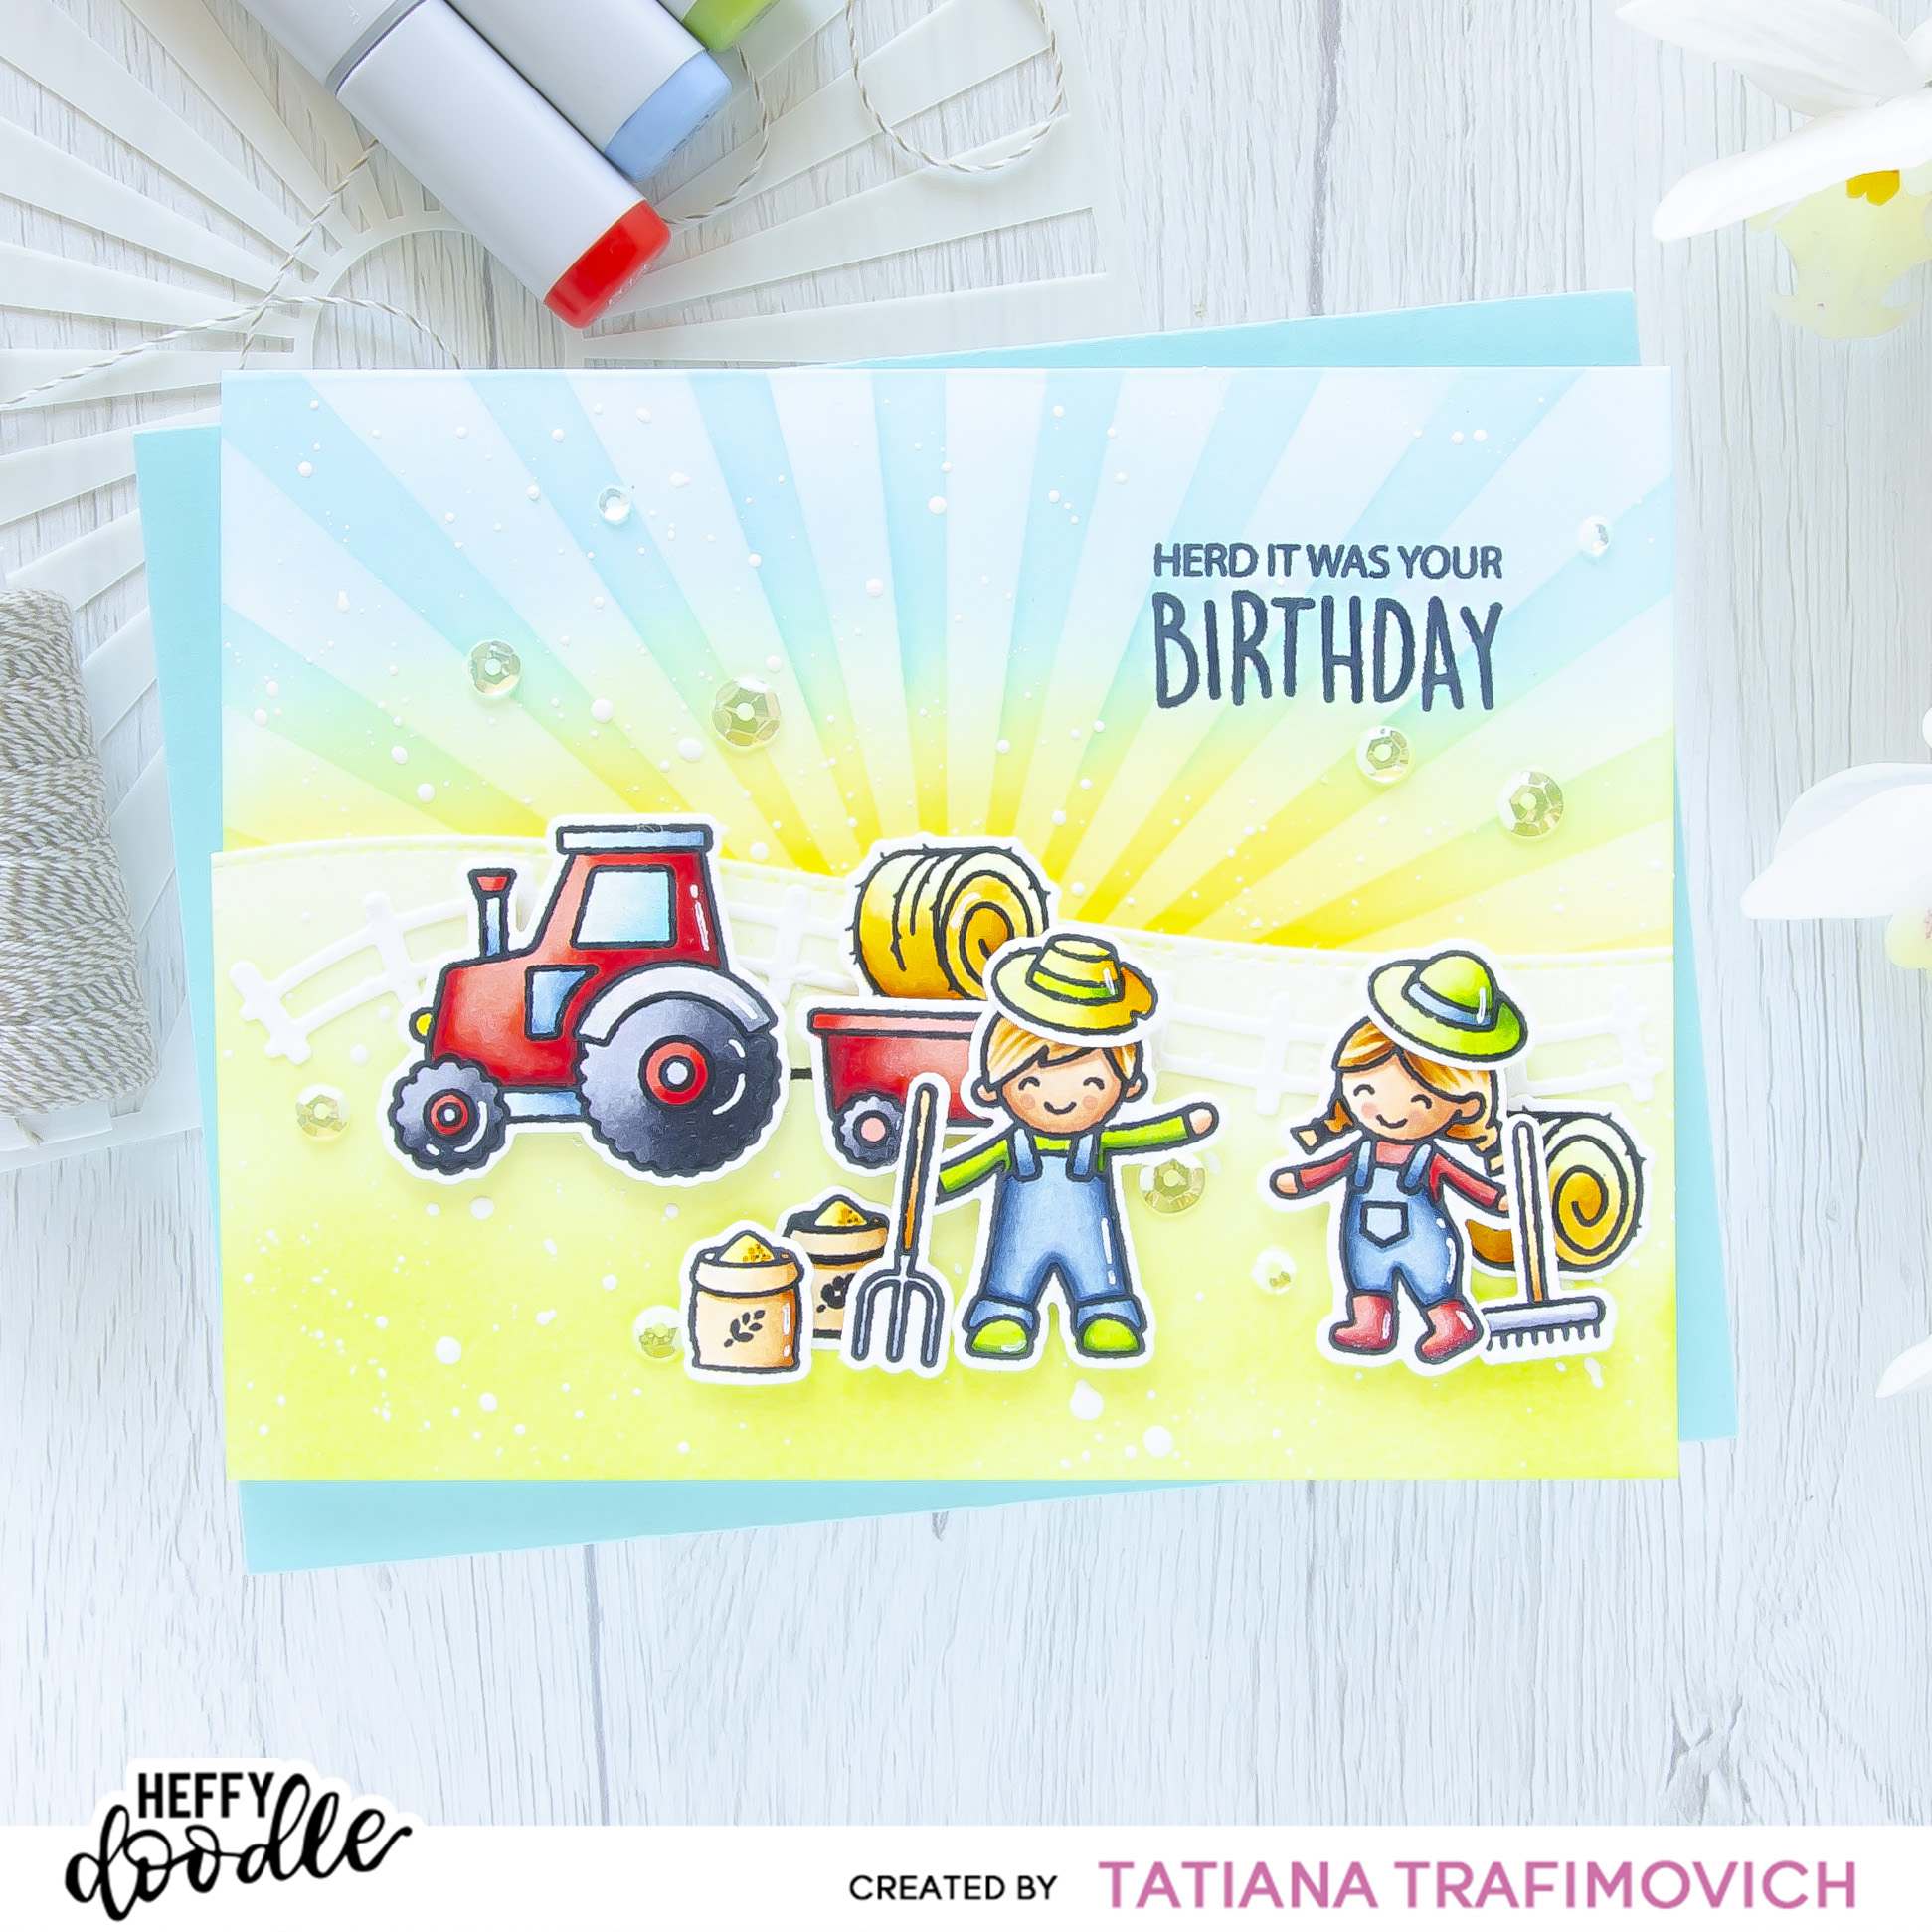 Herd It Was Your Birthday #handmade card by Tatiana Trafimovich #tatianacraftandart - stamps and dies by Heffy Doodle #heffydoodle